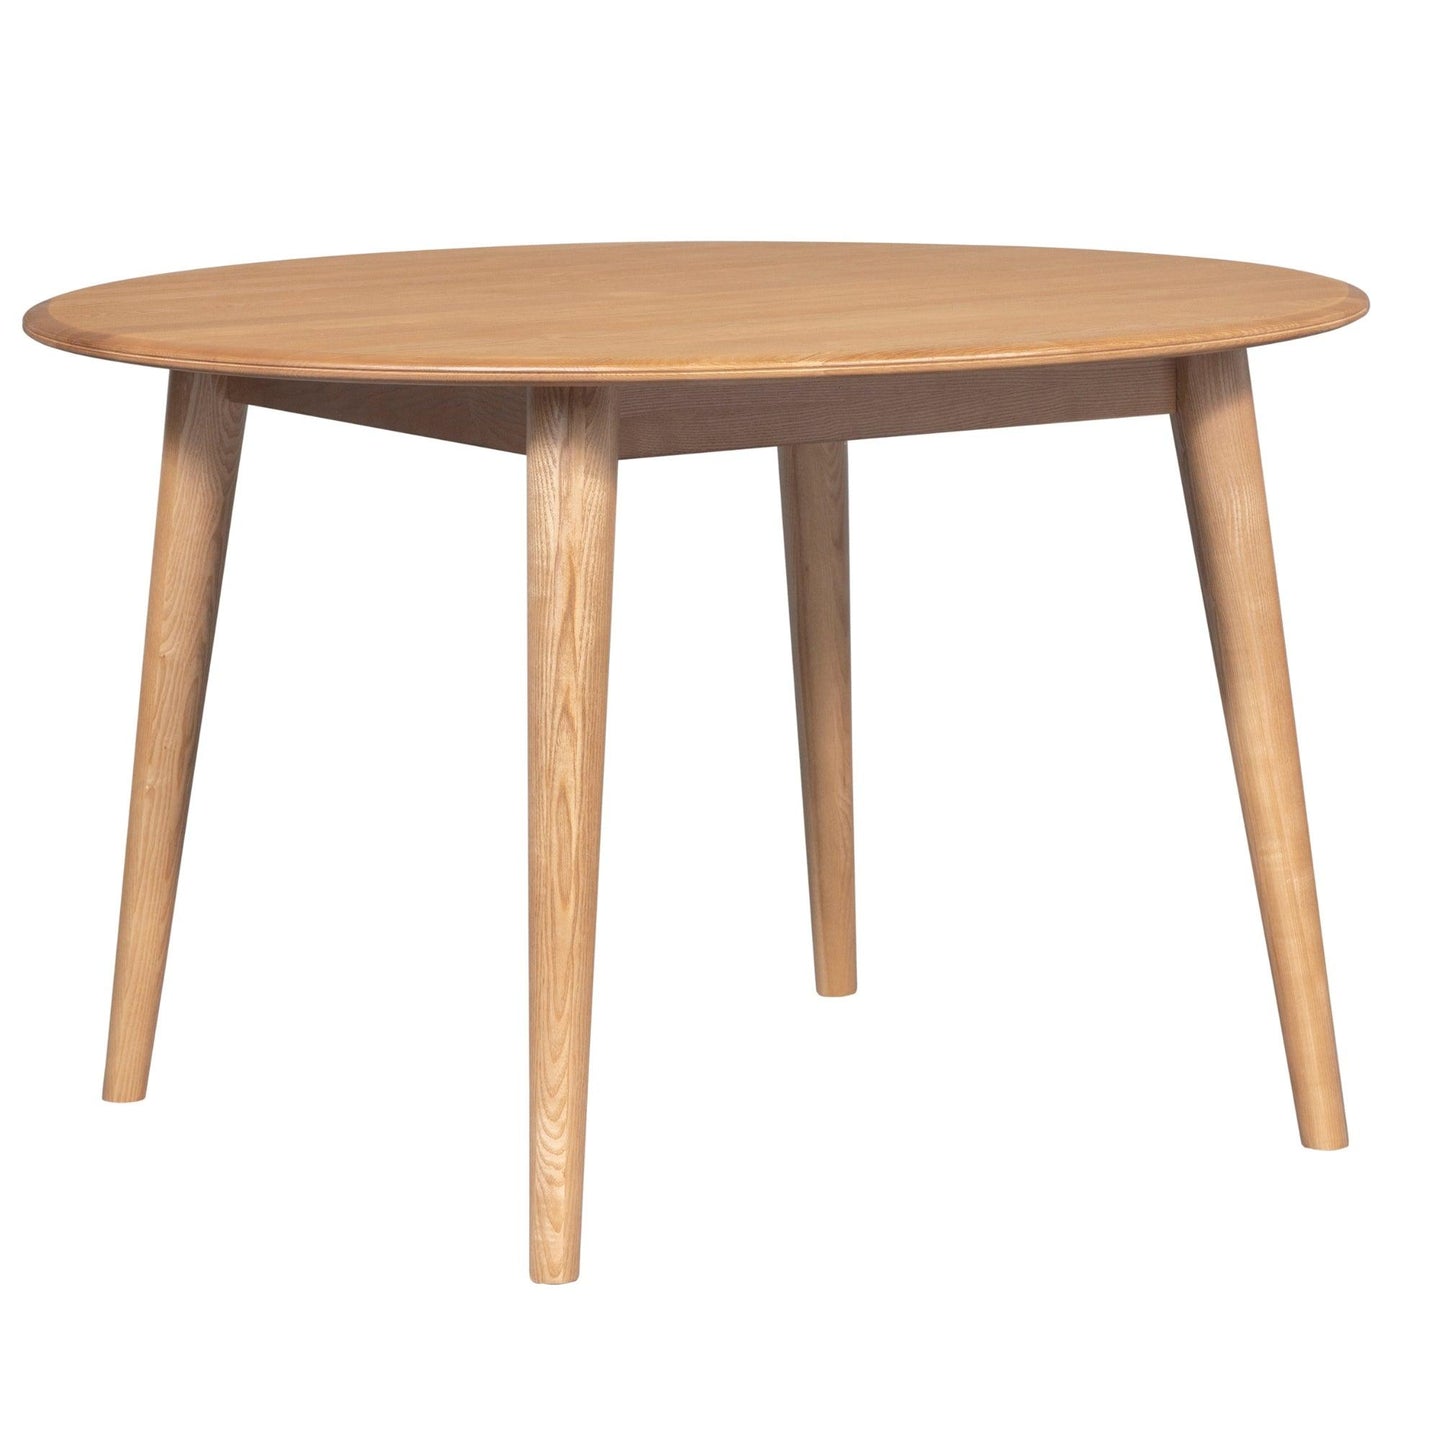 Buy Emilio 120cm Round Dining Table Scandinavian Style Solid Ash Wood Oak discounted | Products On Sale Australia